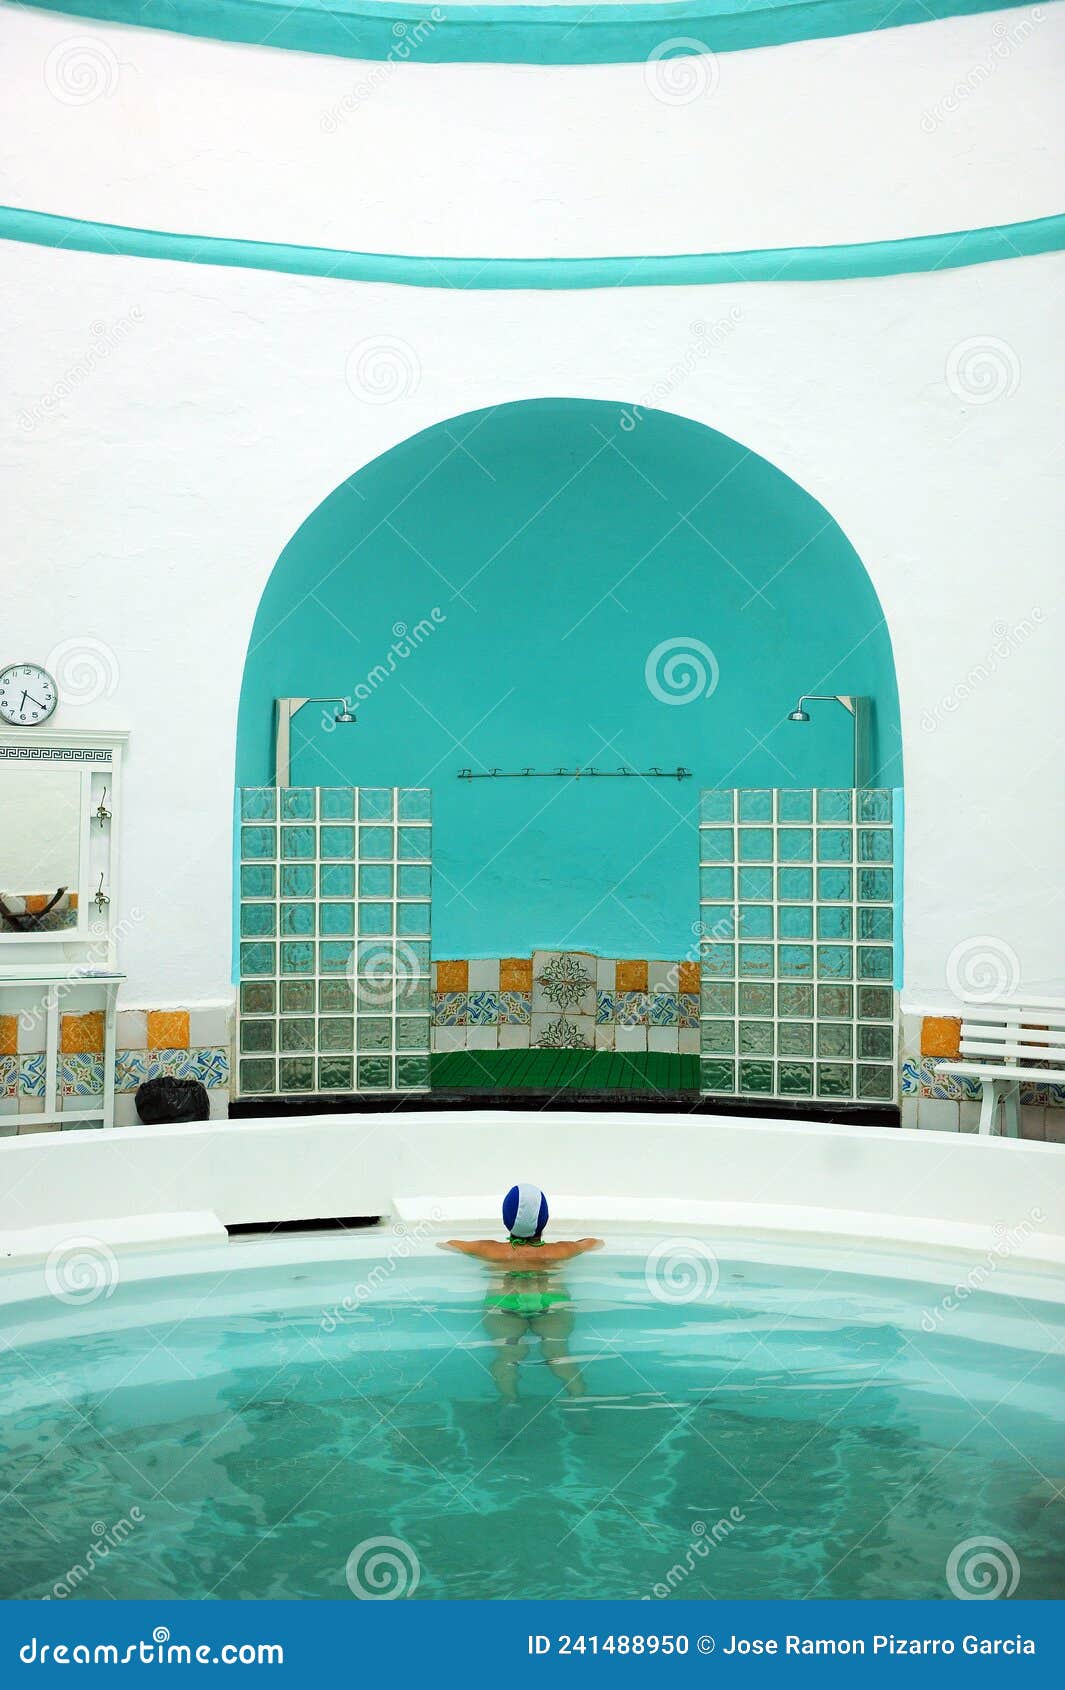 woman inside the roman pool of the spa of alange -balneario- famous thermal bath in the province of badajoz, spain